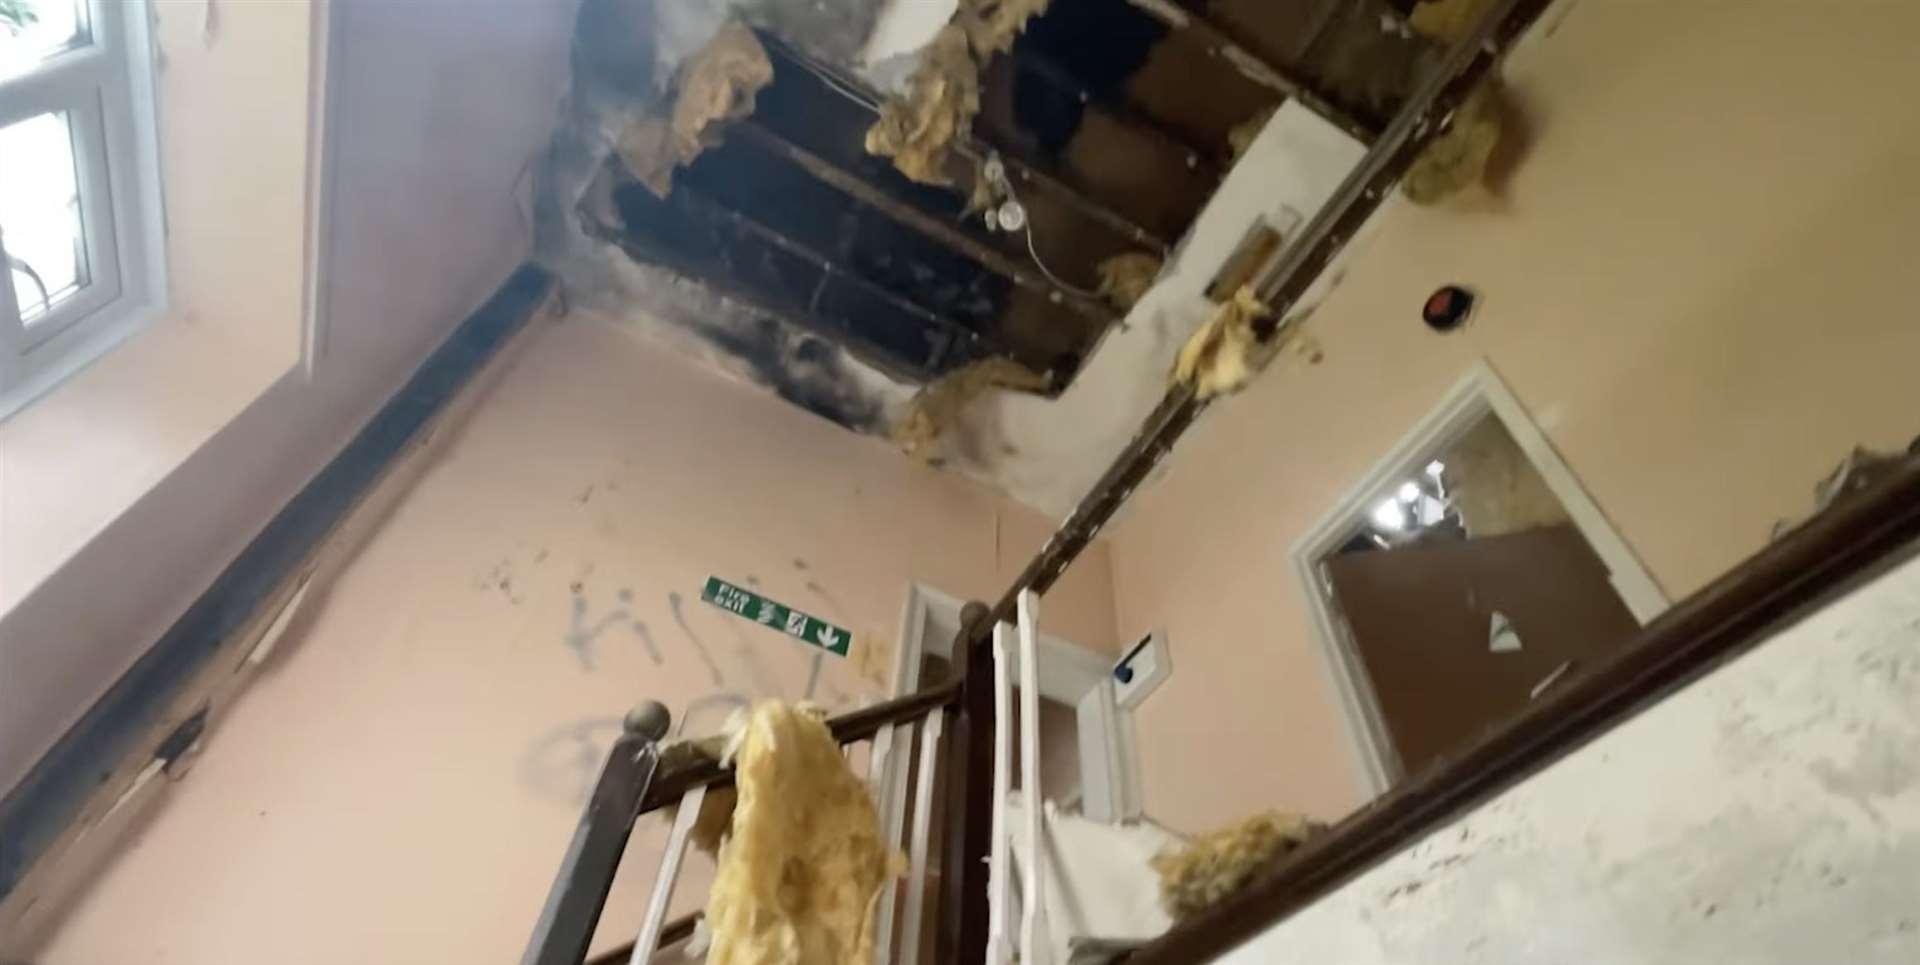 A view from the staircase showing the extent of internal damage. Pic: Clive Emson